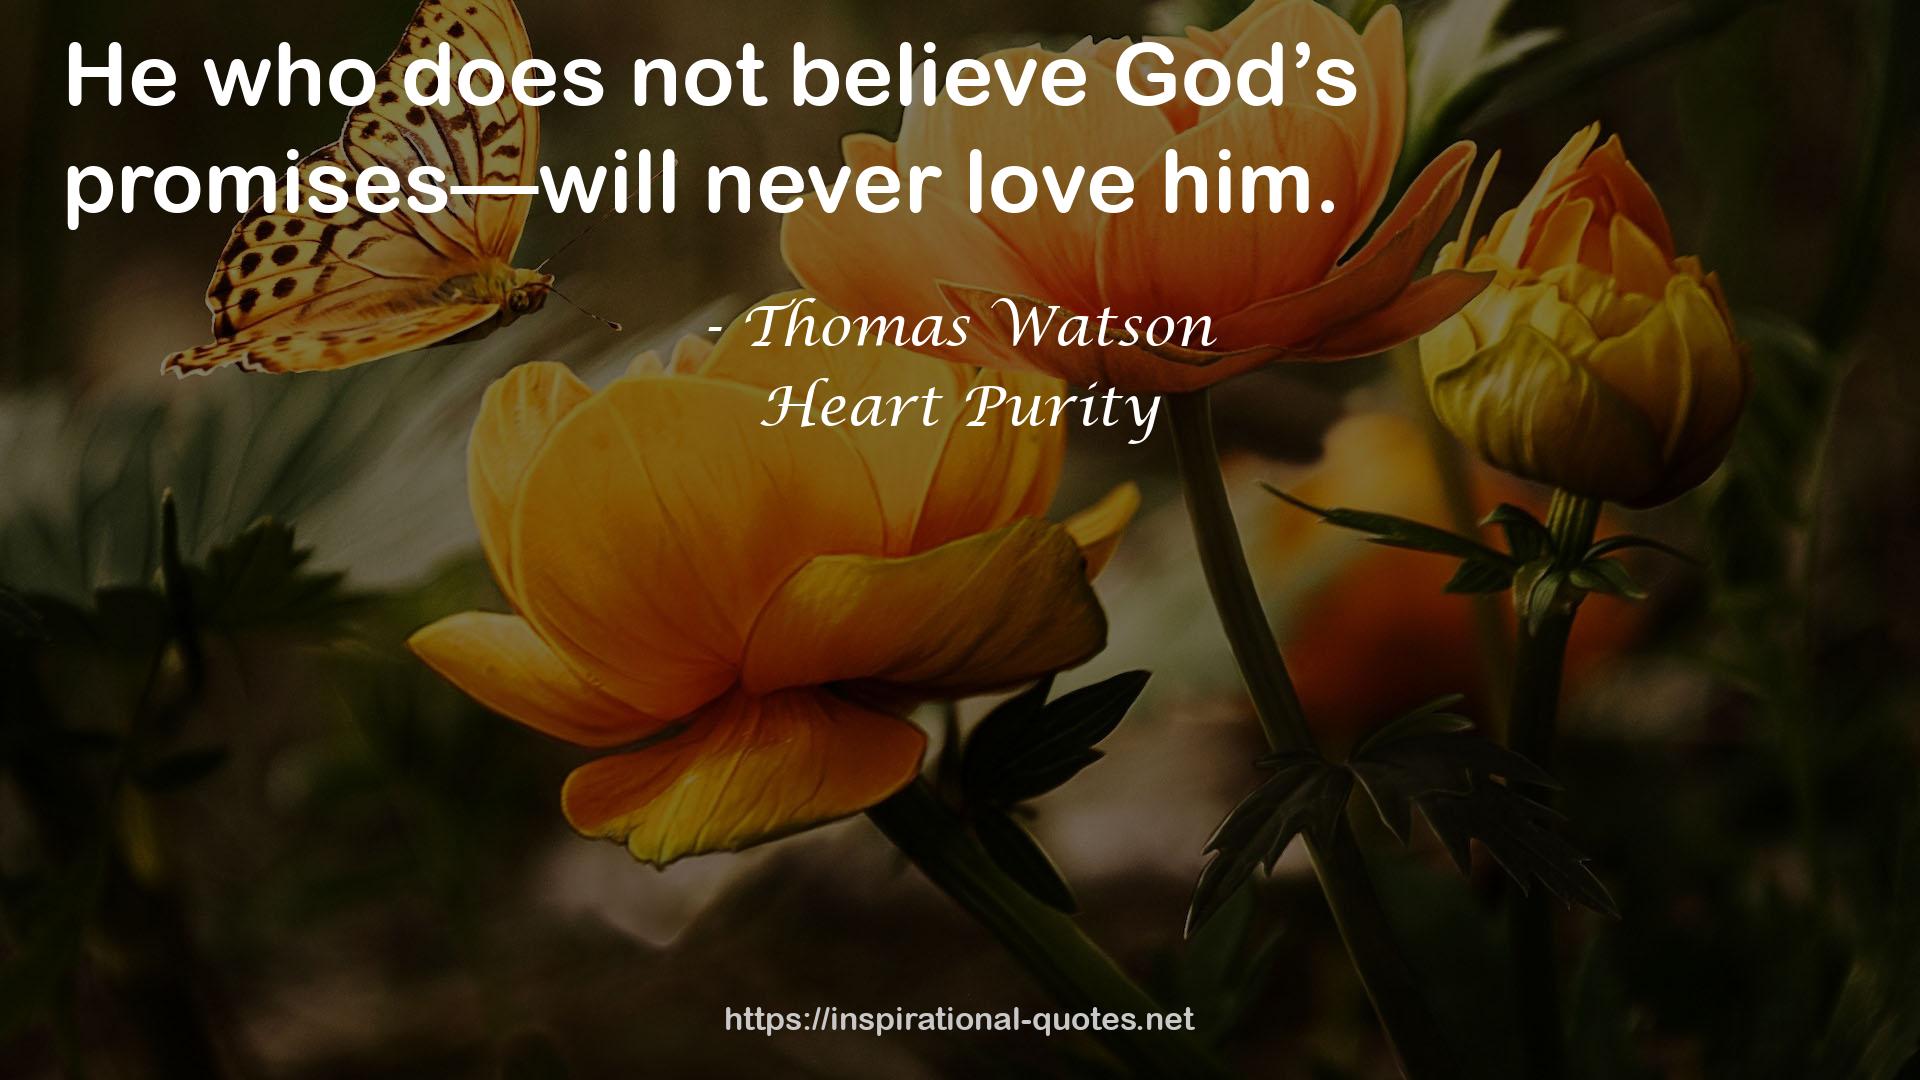 Heart Purity QUOTES